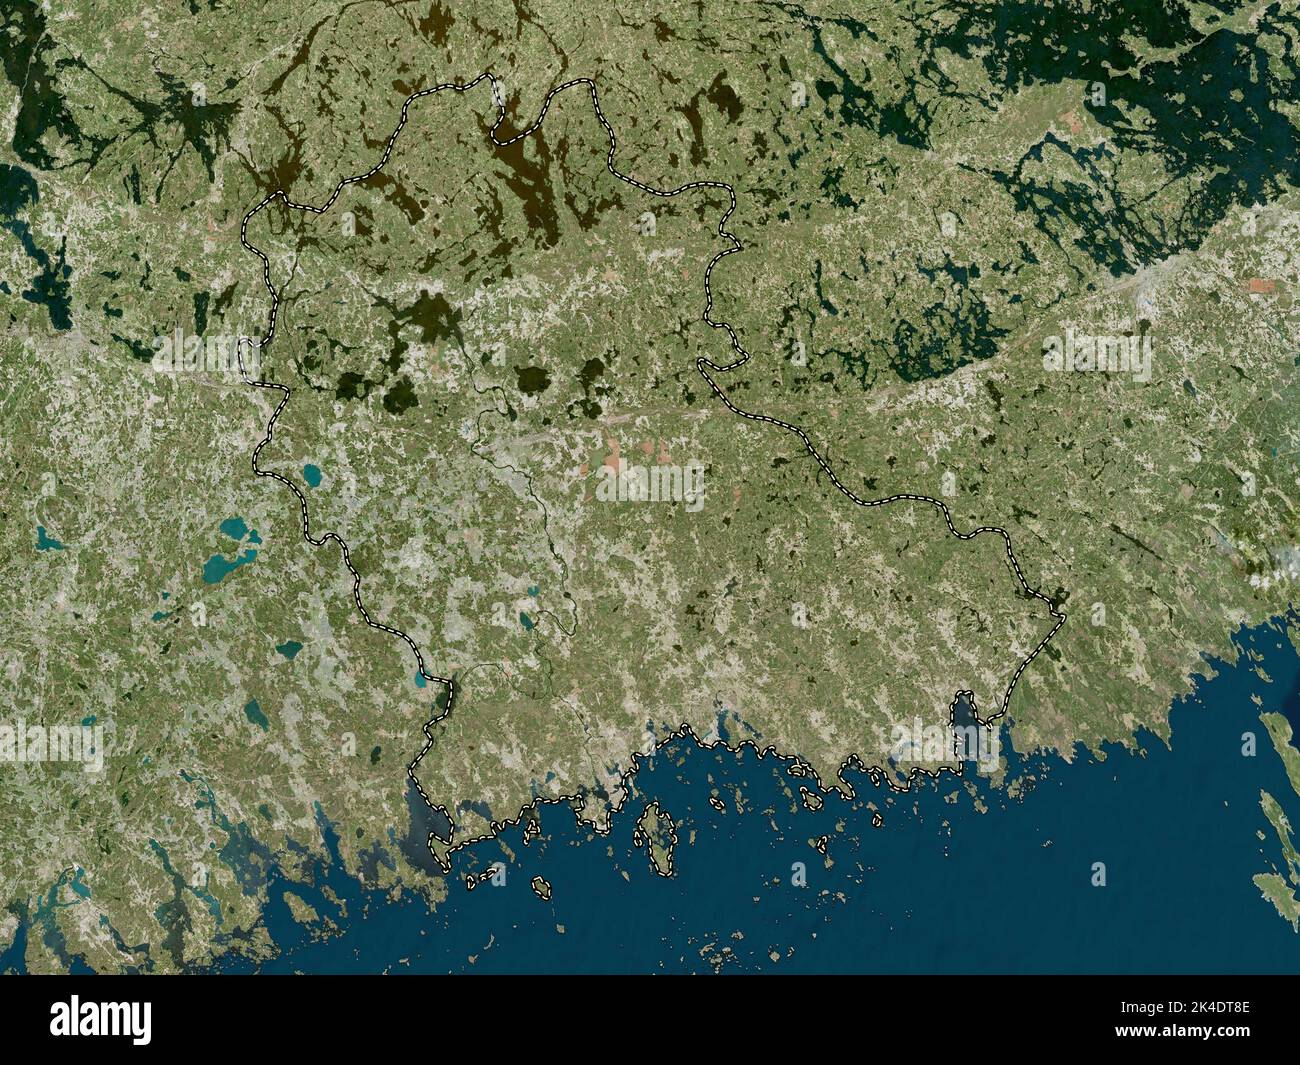 Kymenlaakso, region of Finland. High resolution satellite map Stock Photo